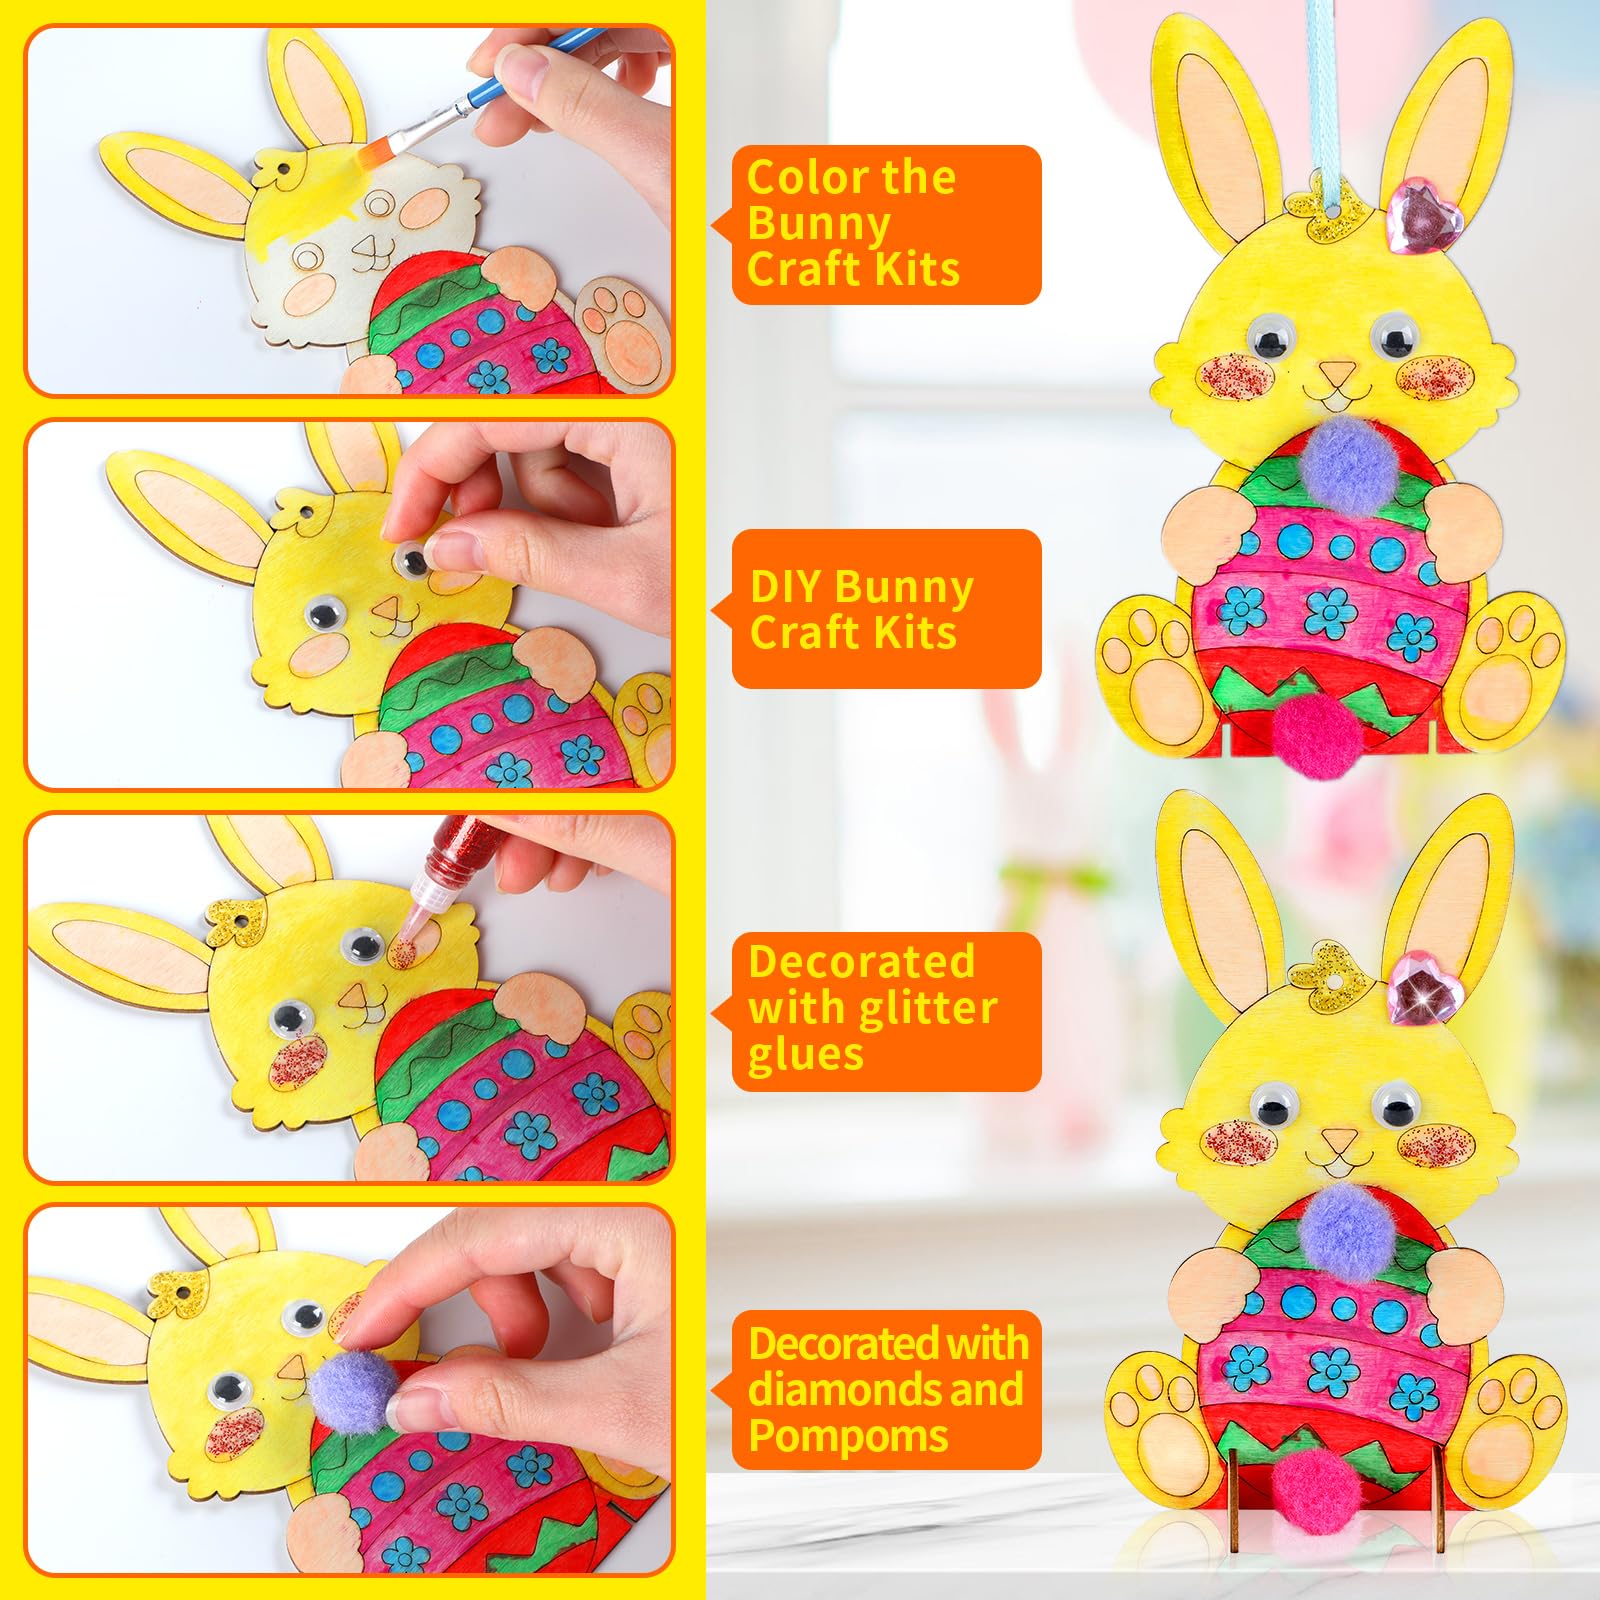 QOUBAI 36 Pack Easter Unfinished Wood Crafts for Kids DIY Coloring Easter Bunny Cutout DIY Easter Hanging Rabbit Wood Arts Crafts Ornaments for Party Favors Activities Gifts Spring Home Decorations